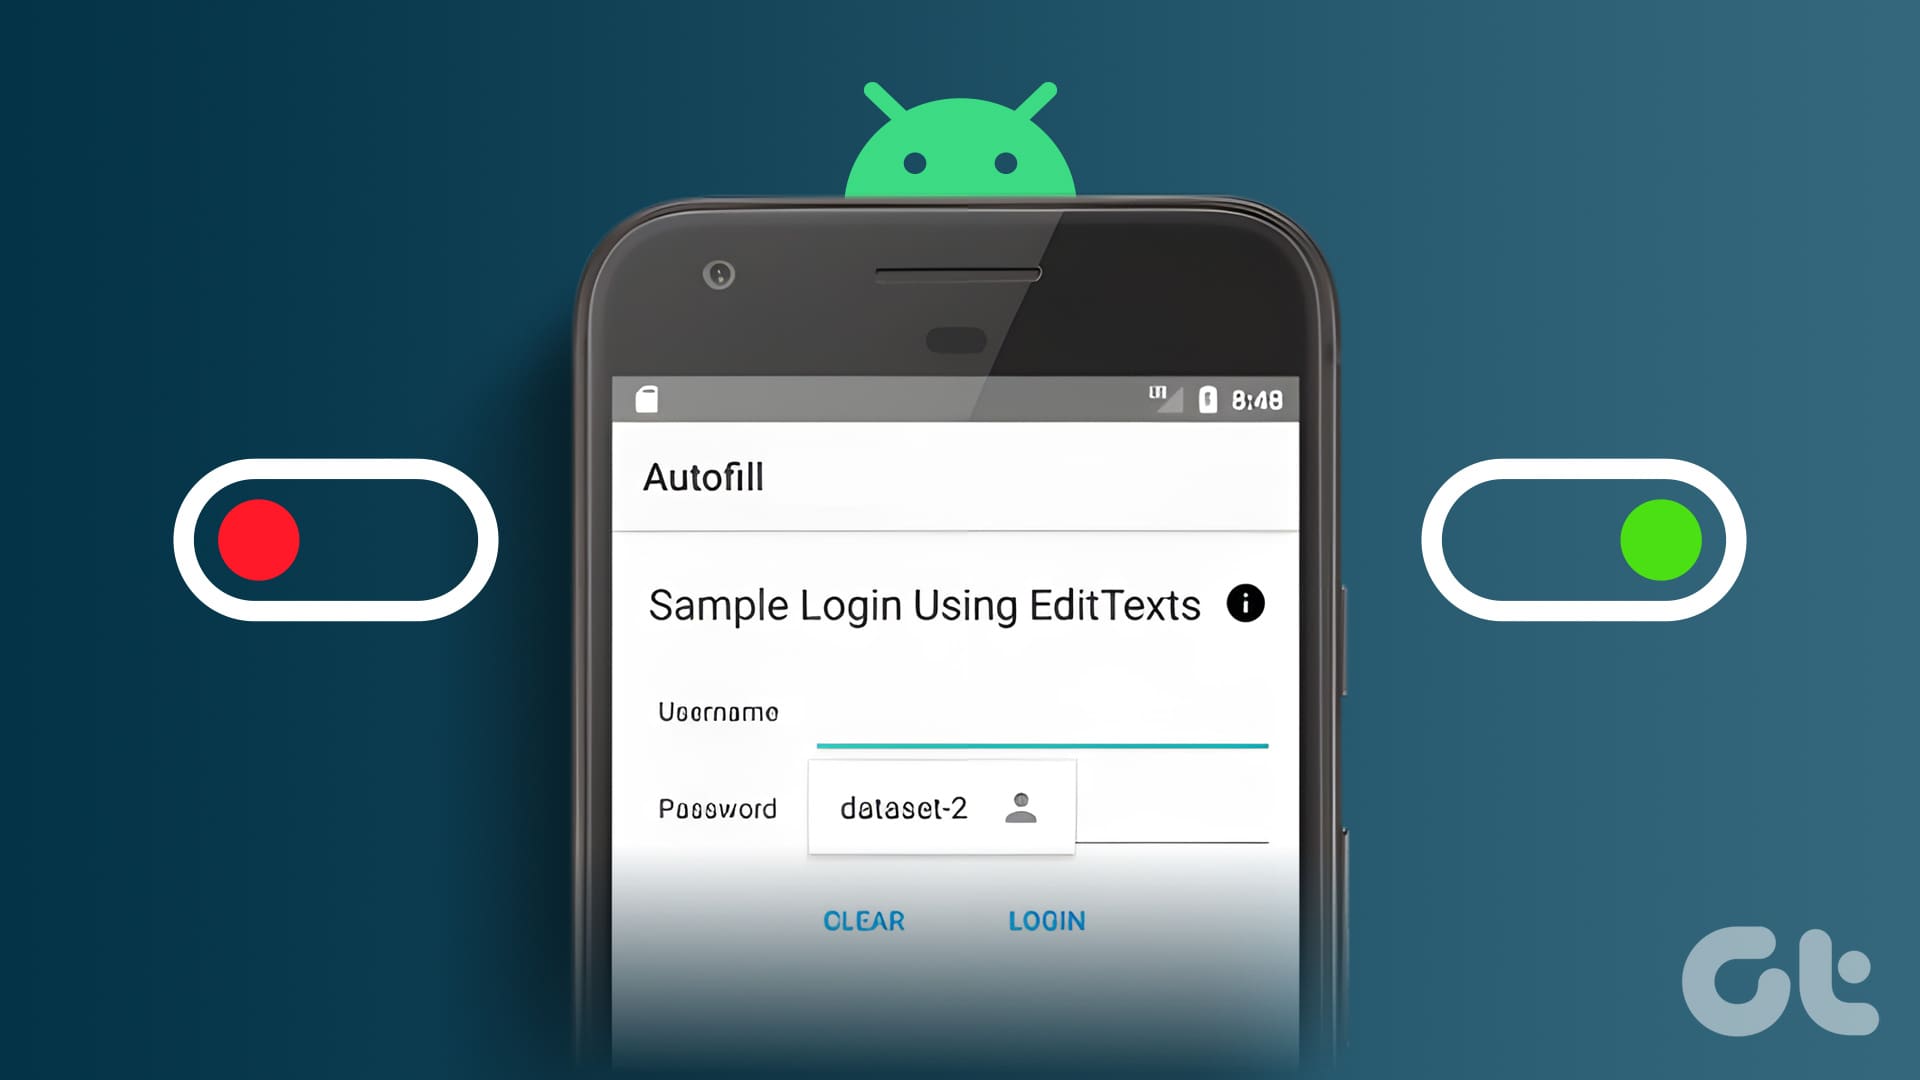 enable and disable Autofill on Android